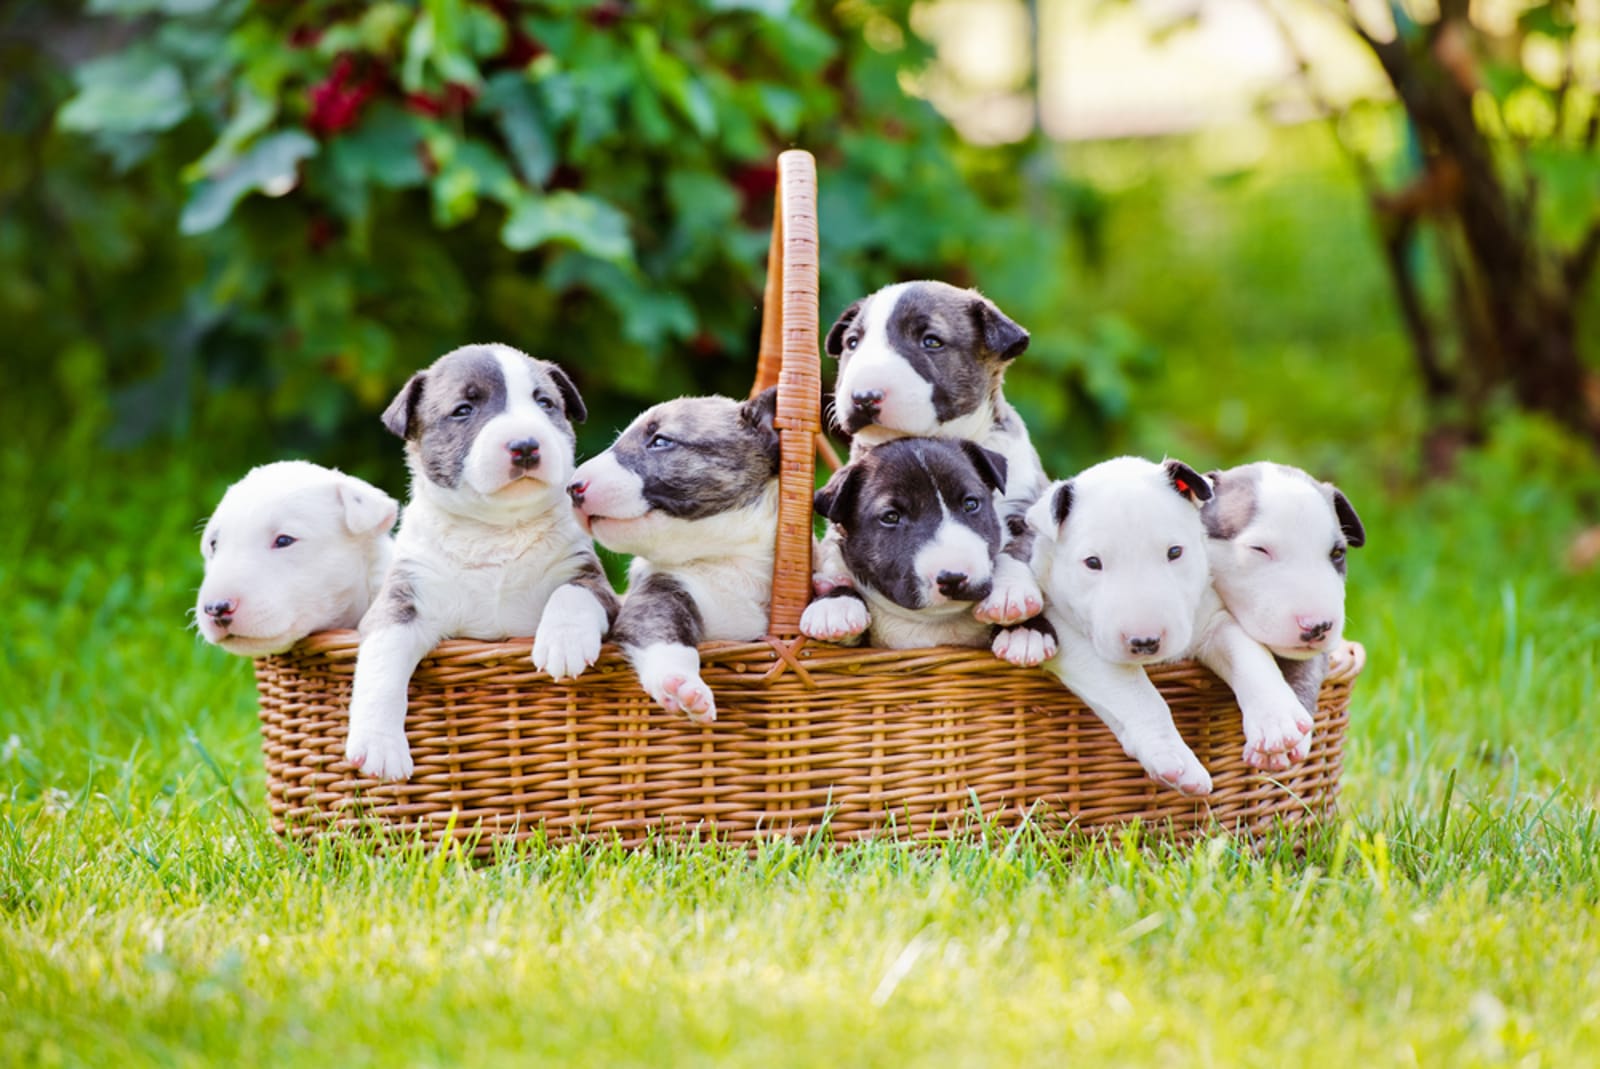 Several puppies in a basket in a field